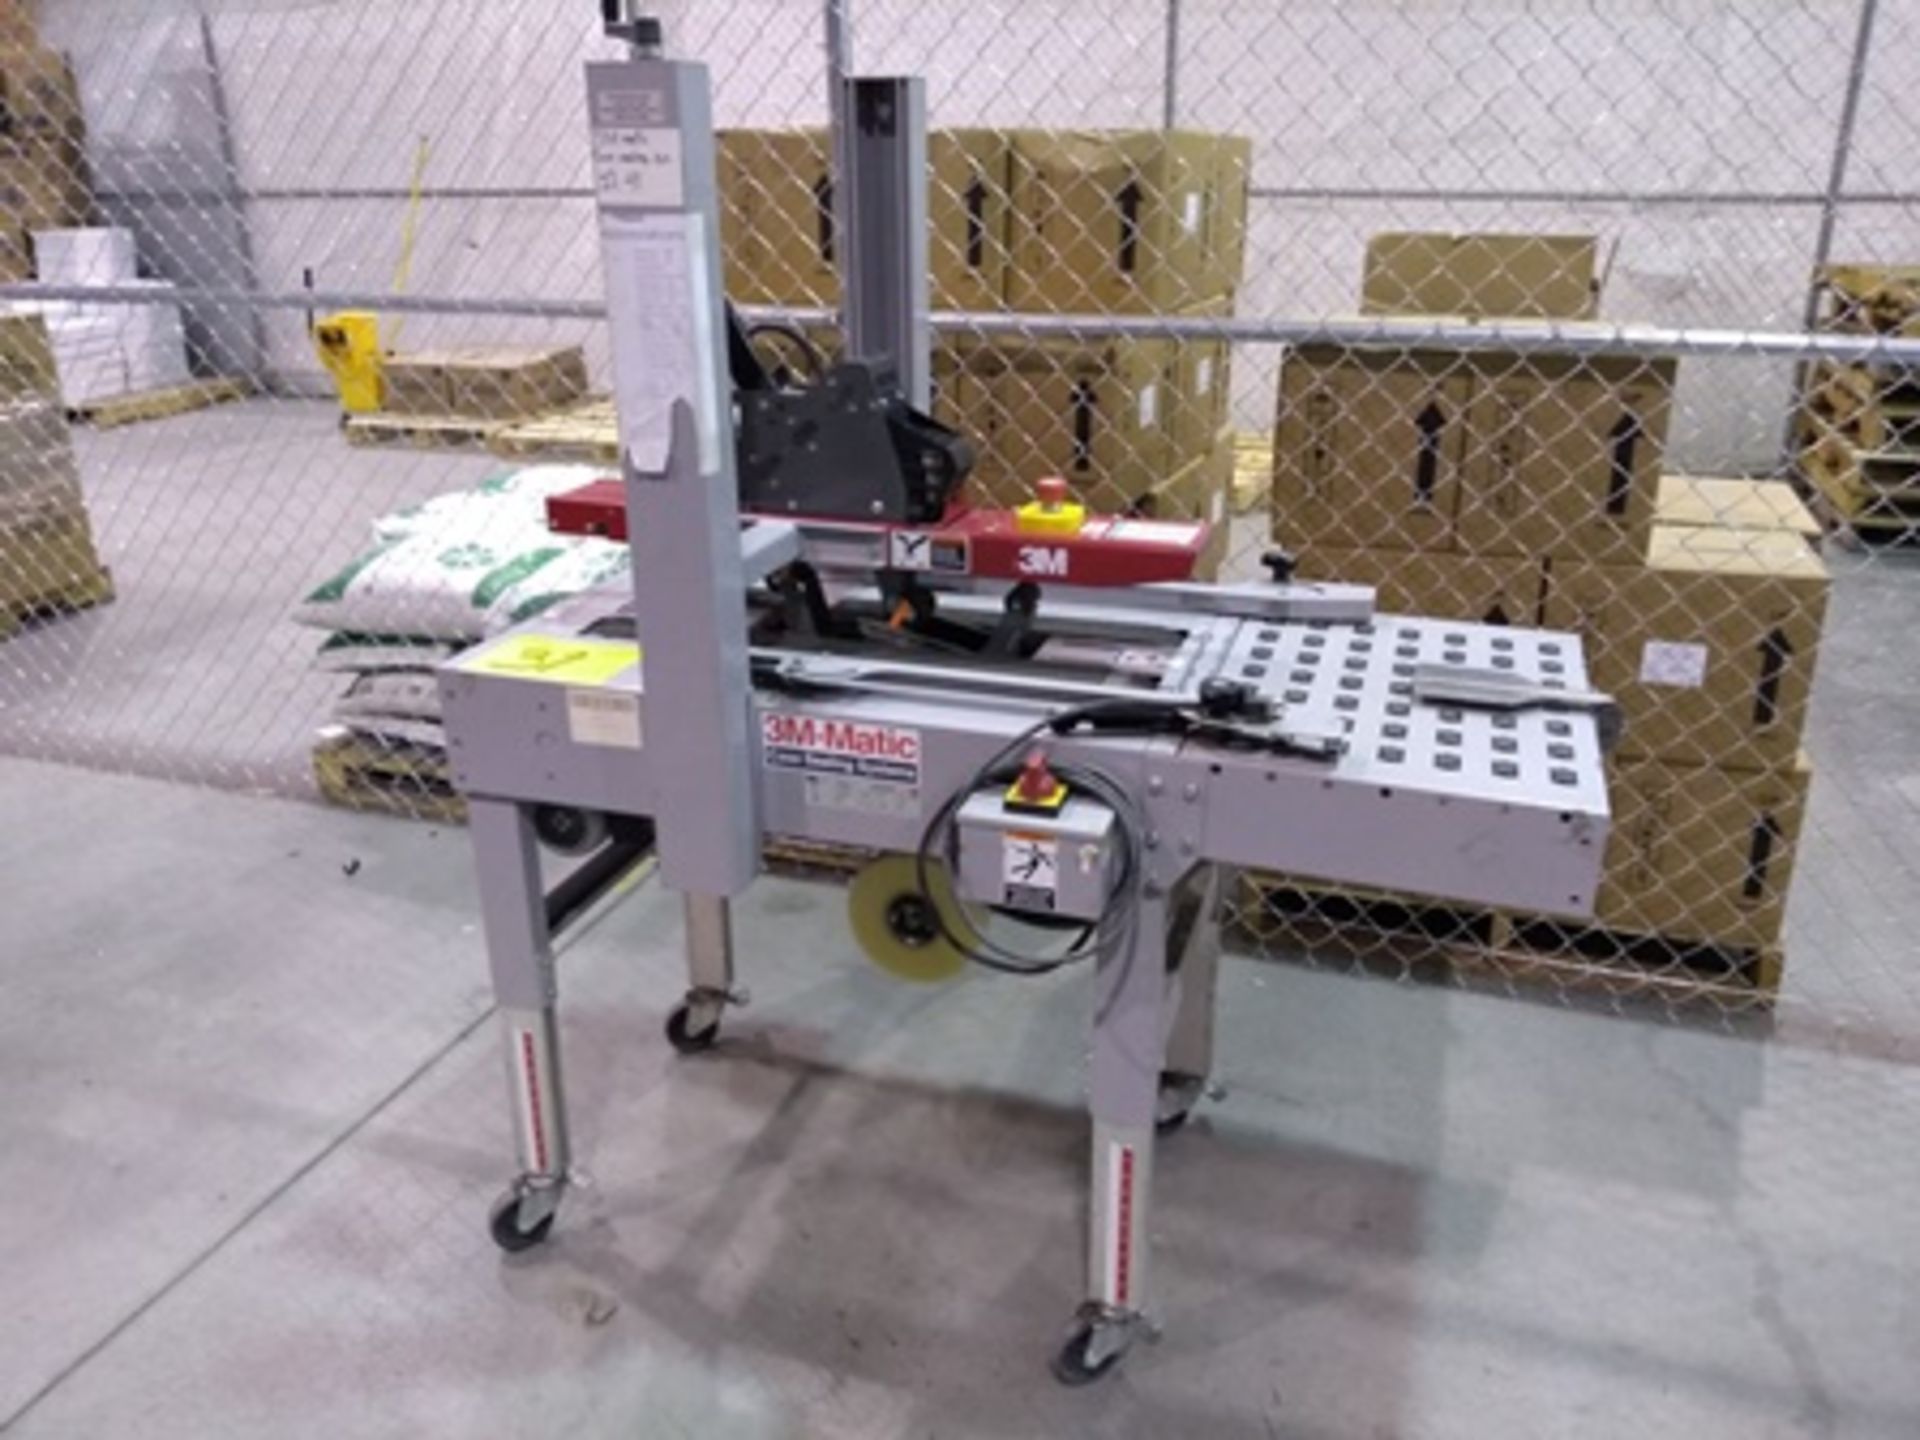 3M-Matic Case Sealing Systems, carton sealing machine mod. A20, serial number 51285, year 2015 … - Image 16 of 29